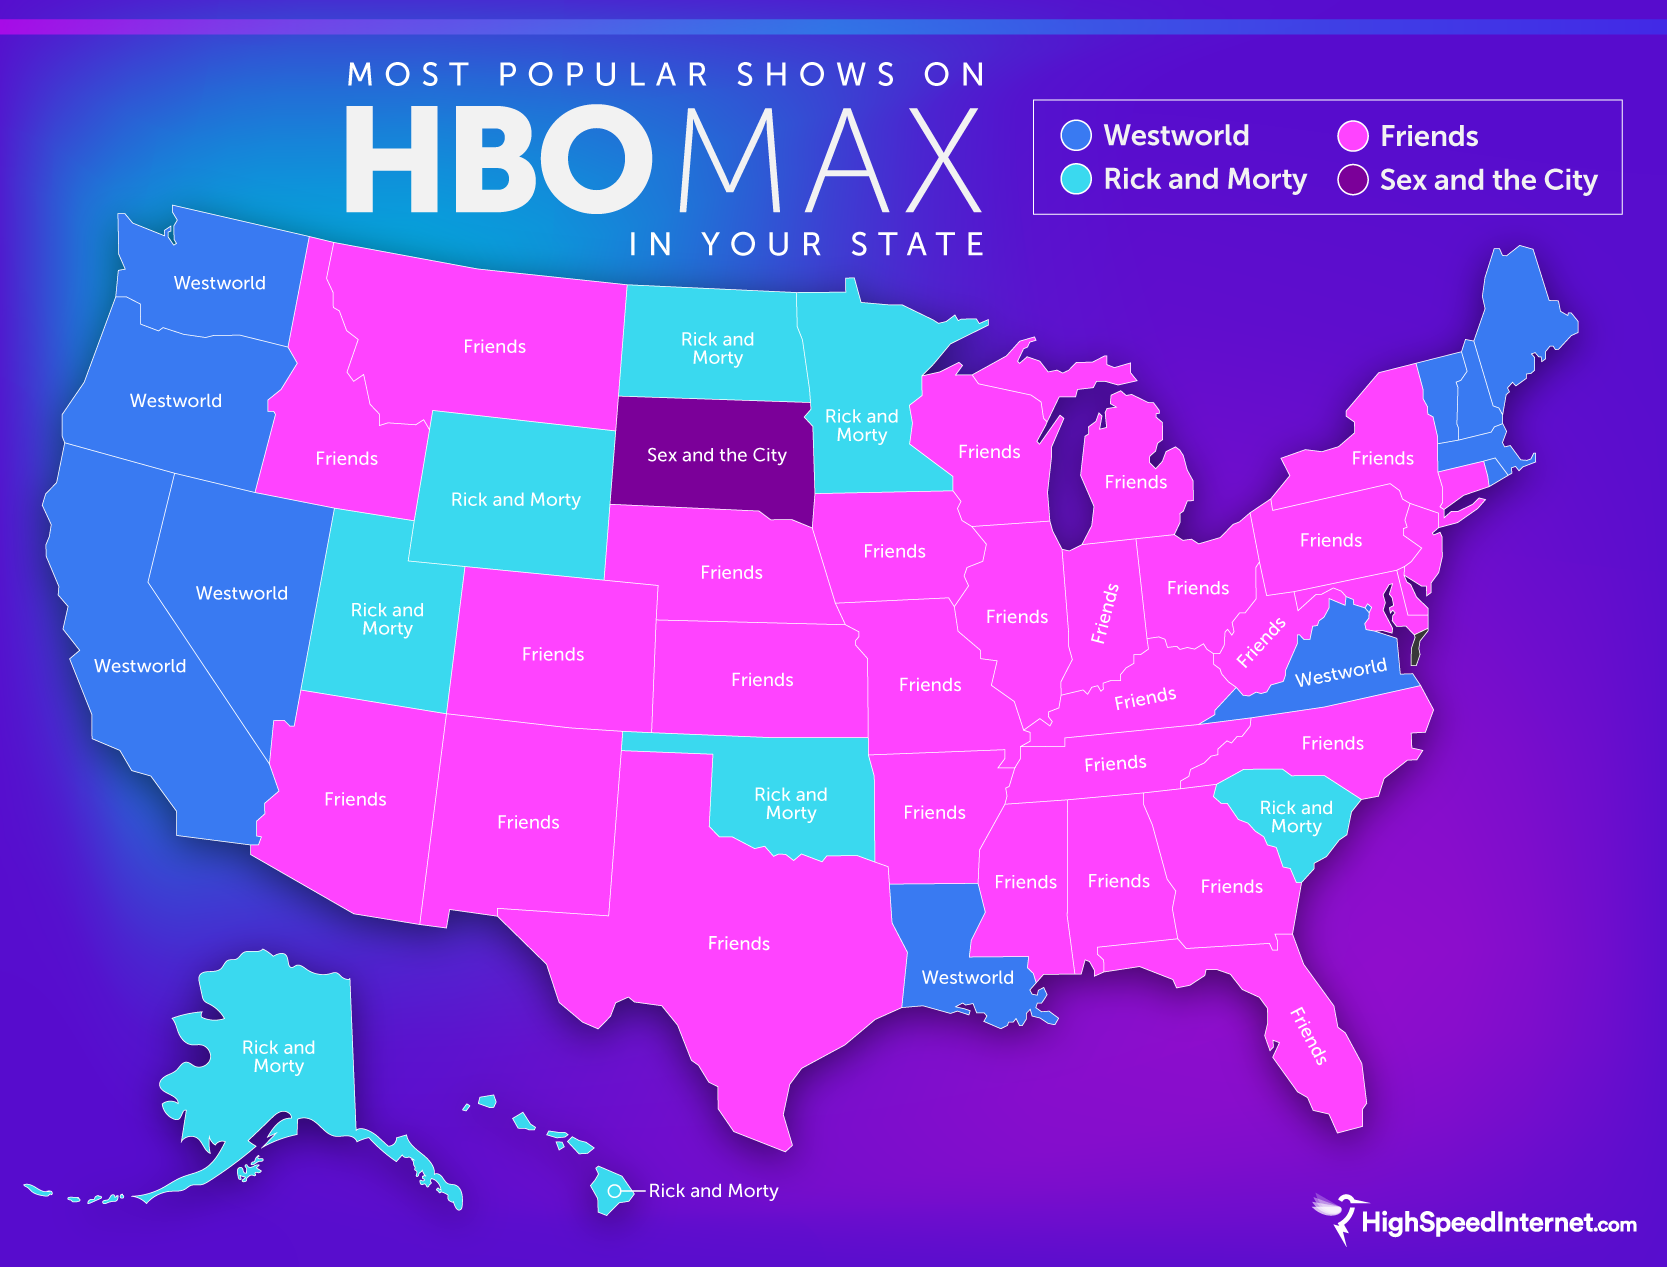 Each State's Favorite H B O Max Show